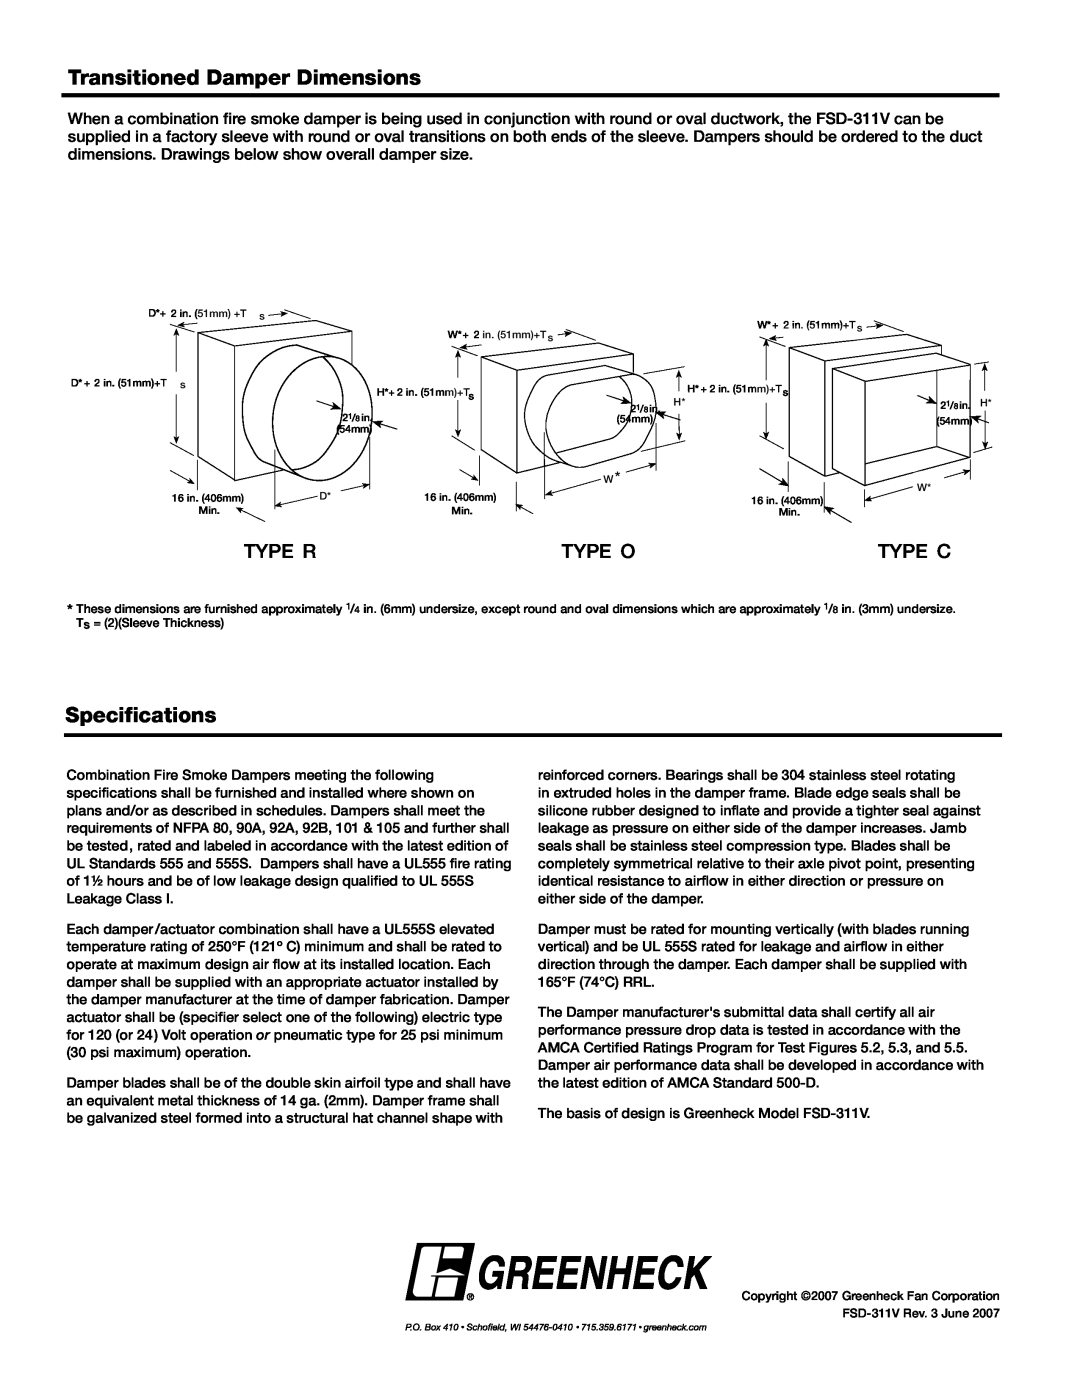 Greenheck Fan FSD-311V installation instructions Transitioned Damper Dimensions, Specifications, Type R, Type O, Type C 